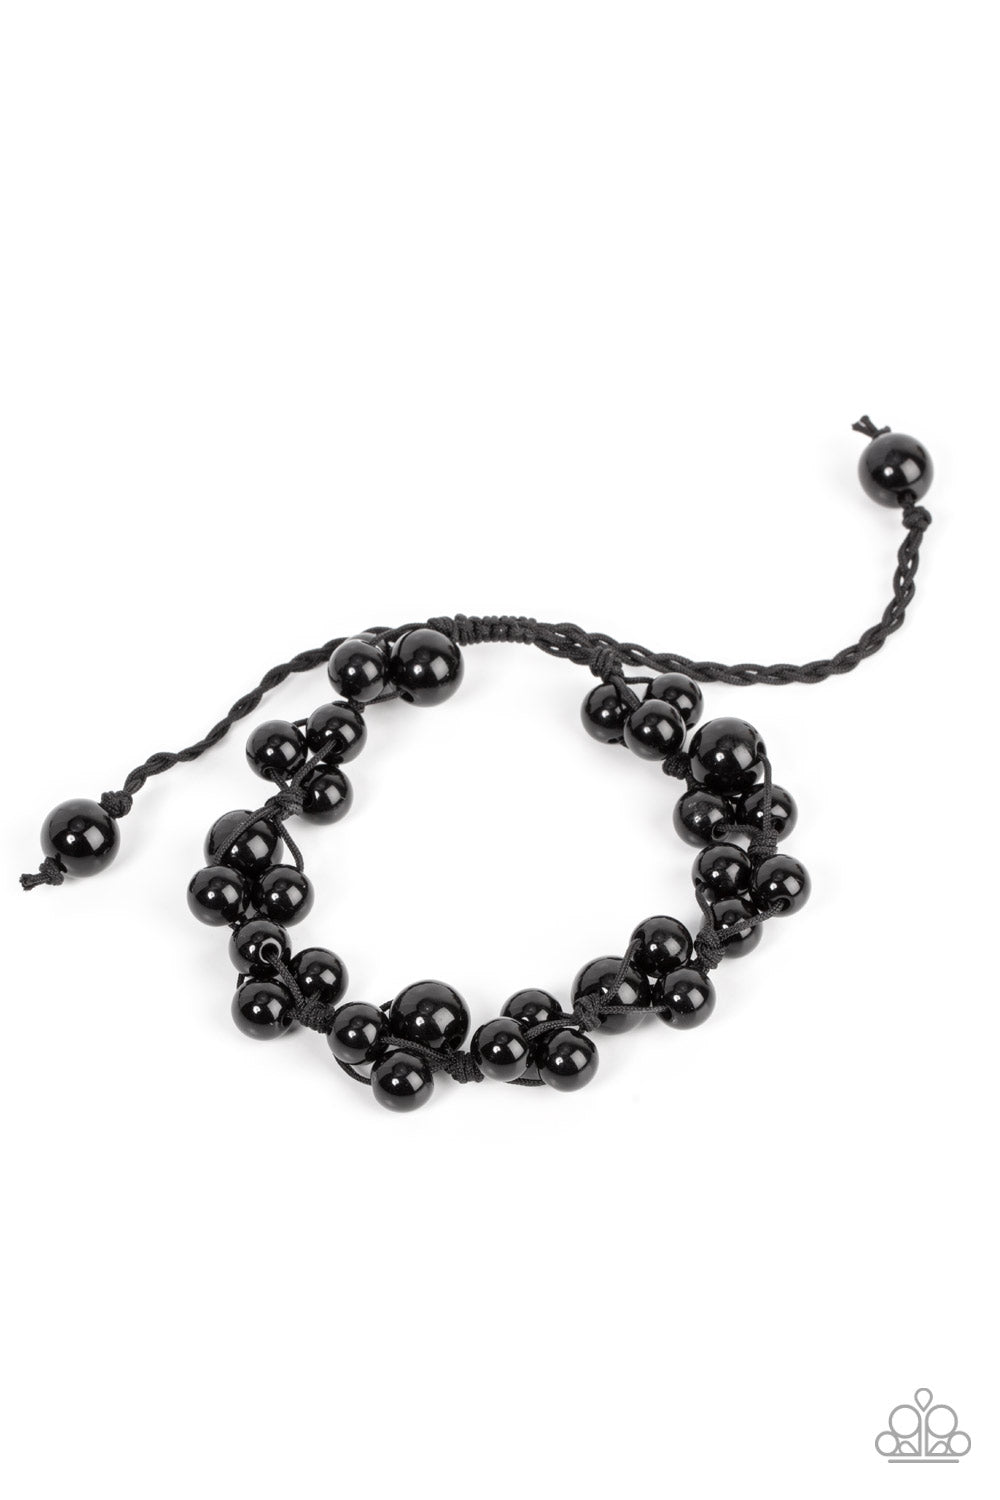 Bubbly clusters of black beads are decoratively knotted around the wrist, adding a timeless twist to the classic centerpiece. Features an adjustable sliding knot closure.